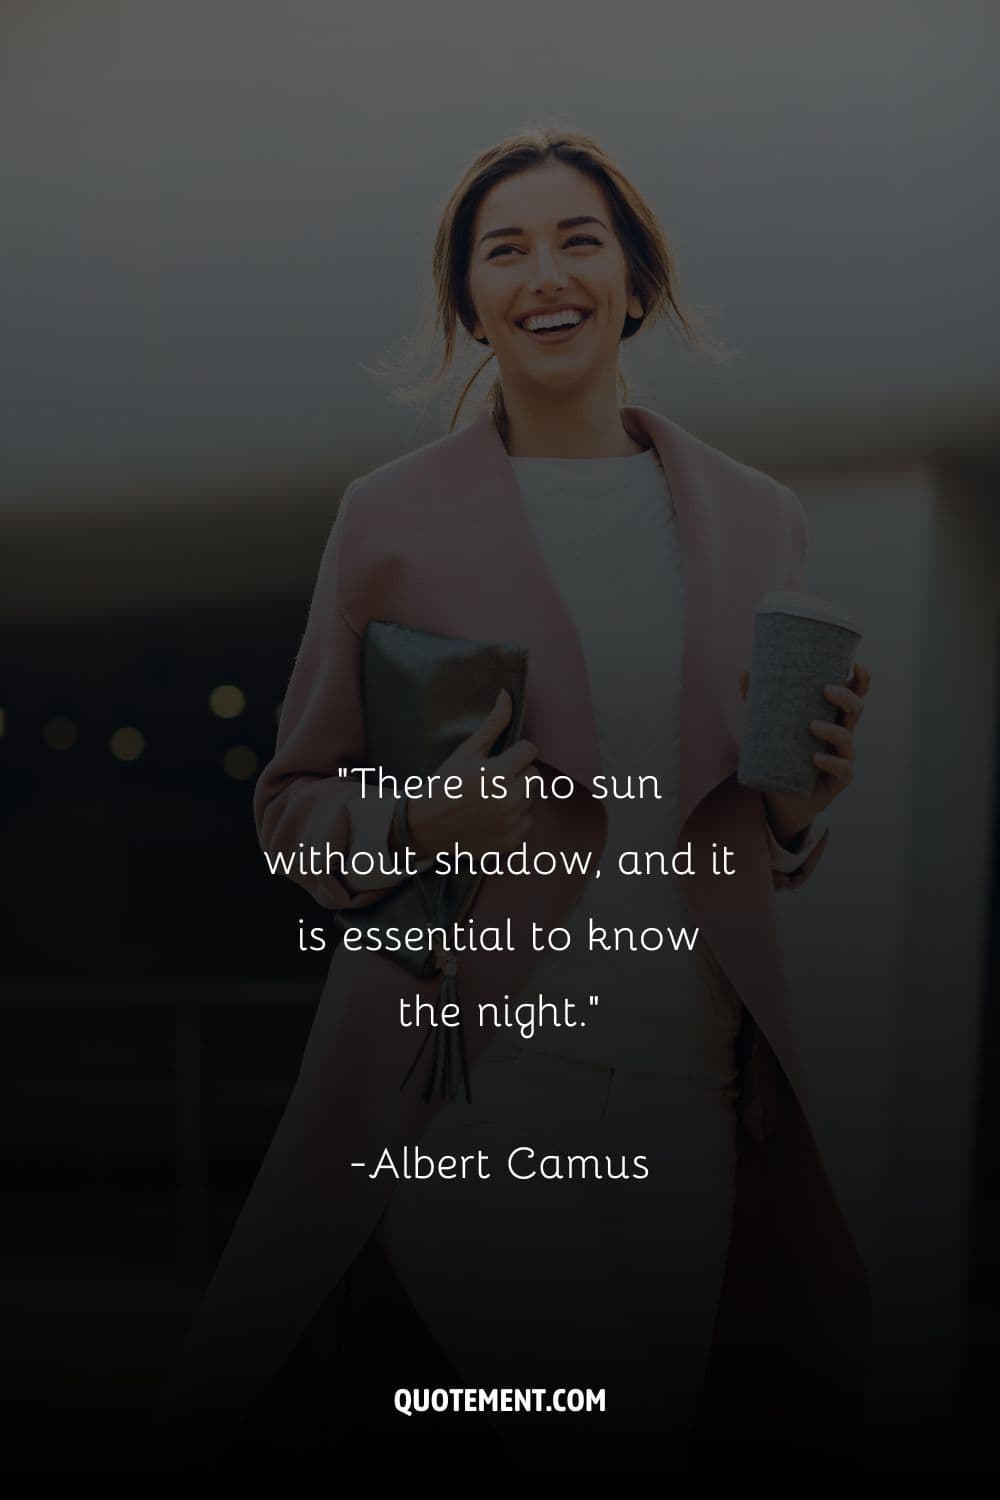 There is no sun without shadow, and it is essential to know the night